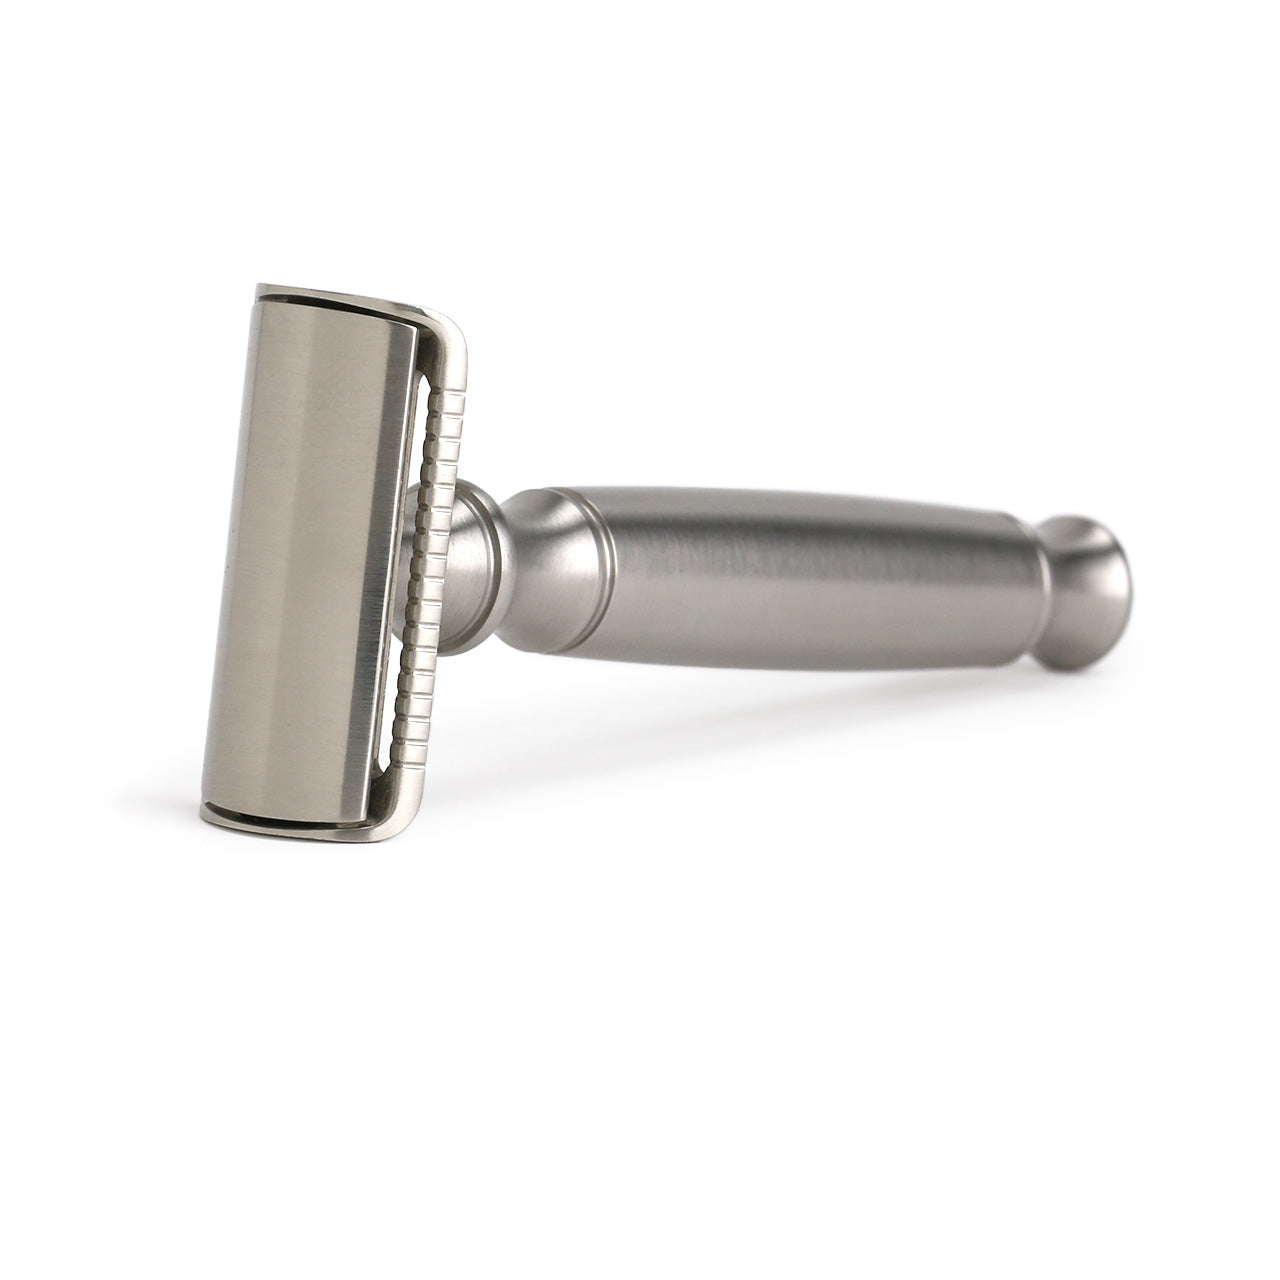 Hefty Safety Razor with Stainless Steel Handle